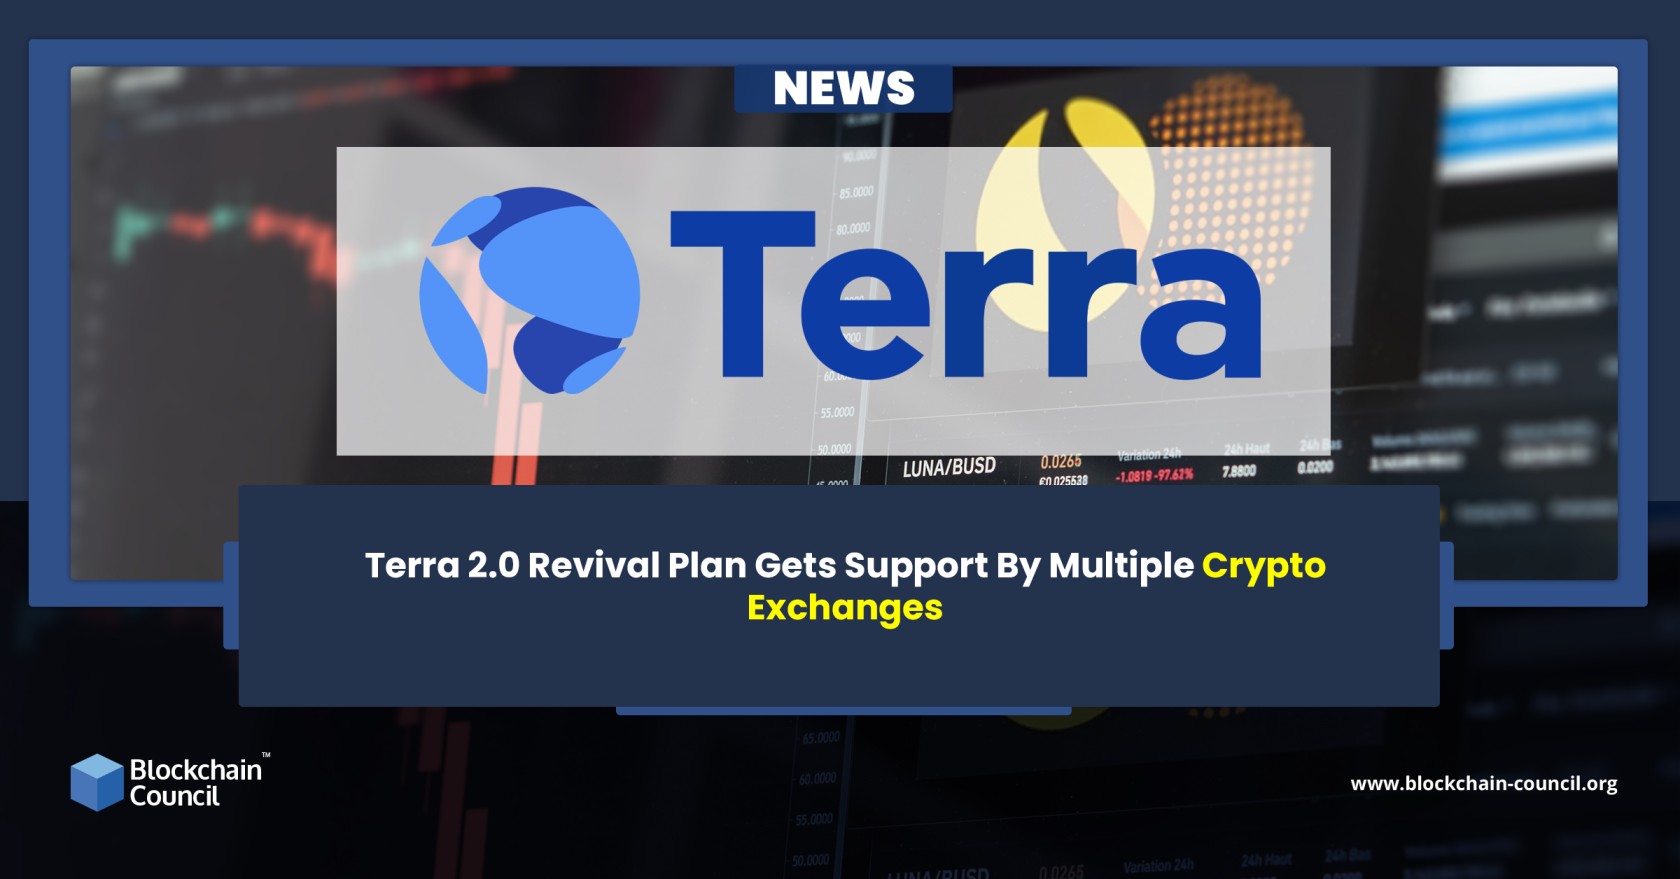 Terra 2.0 Revival Plan Gets Support By Multiple Crypto Exchanges